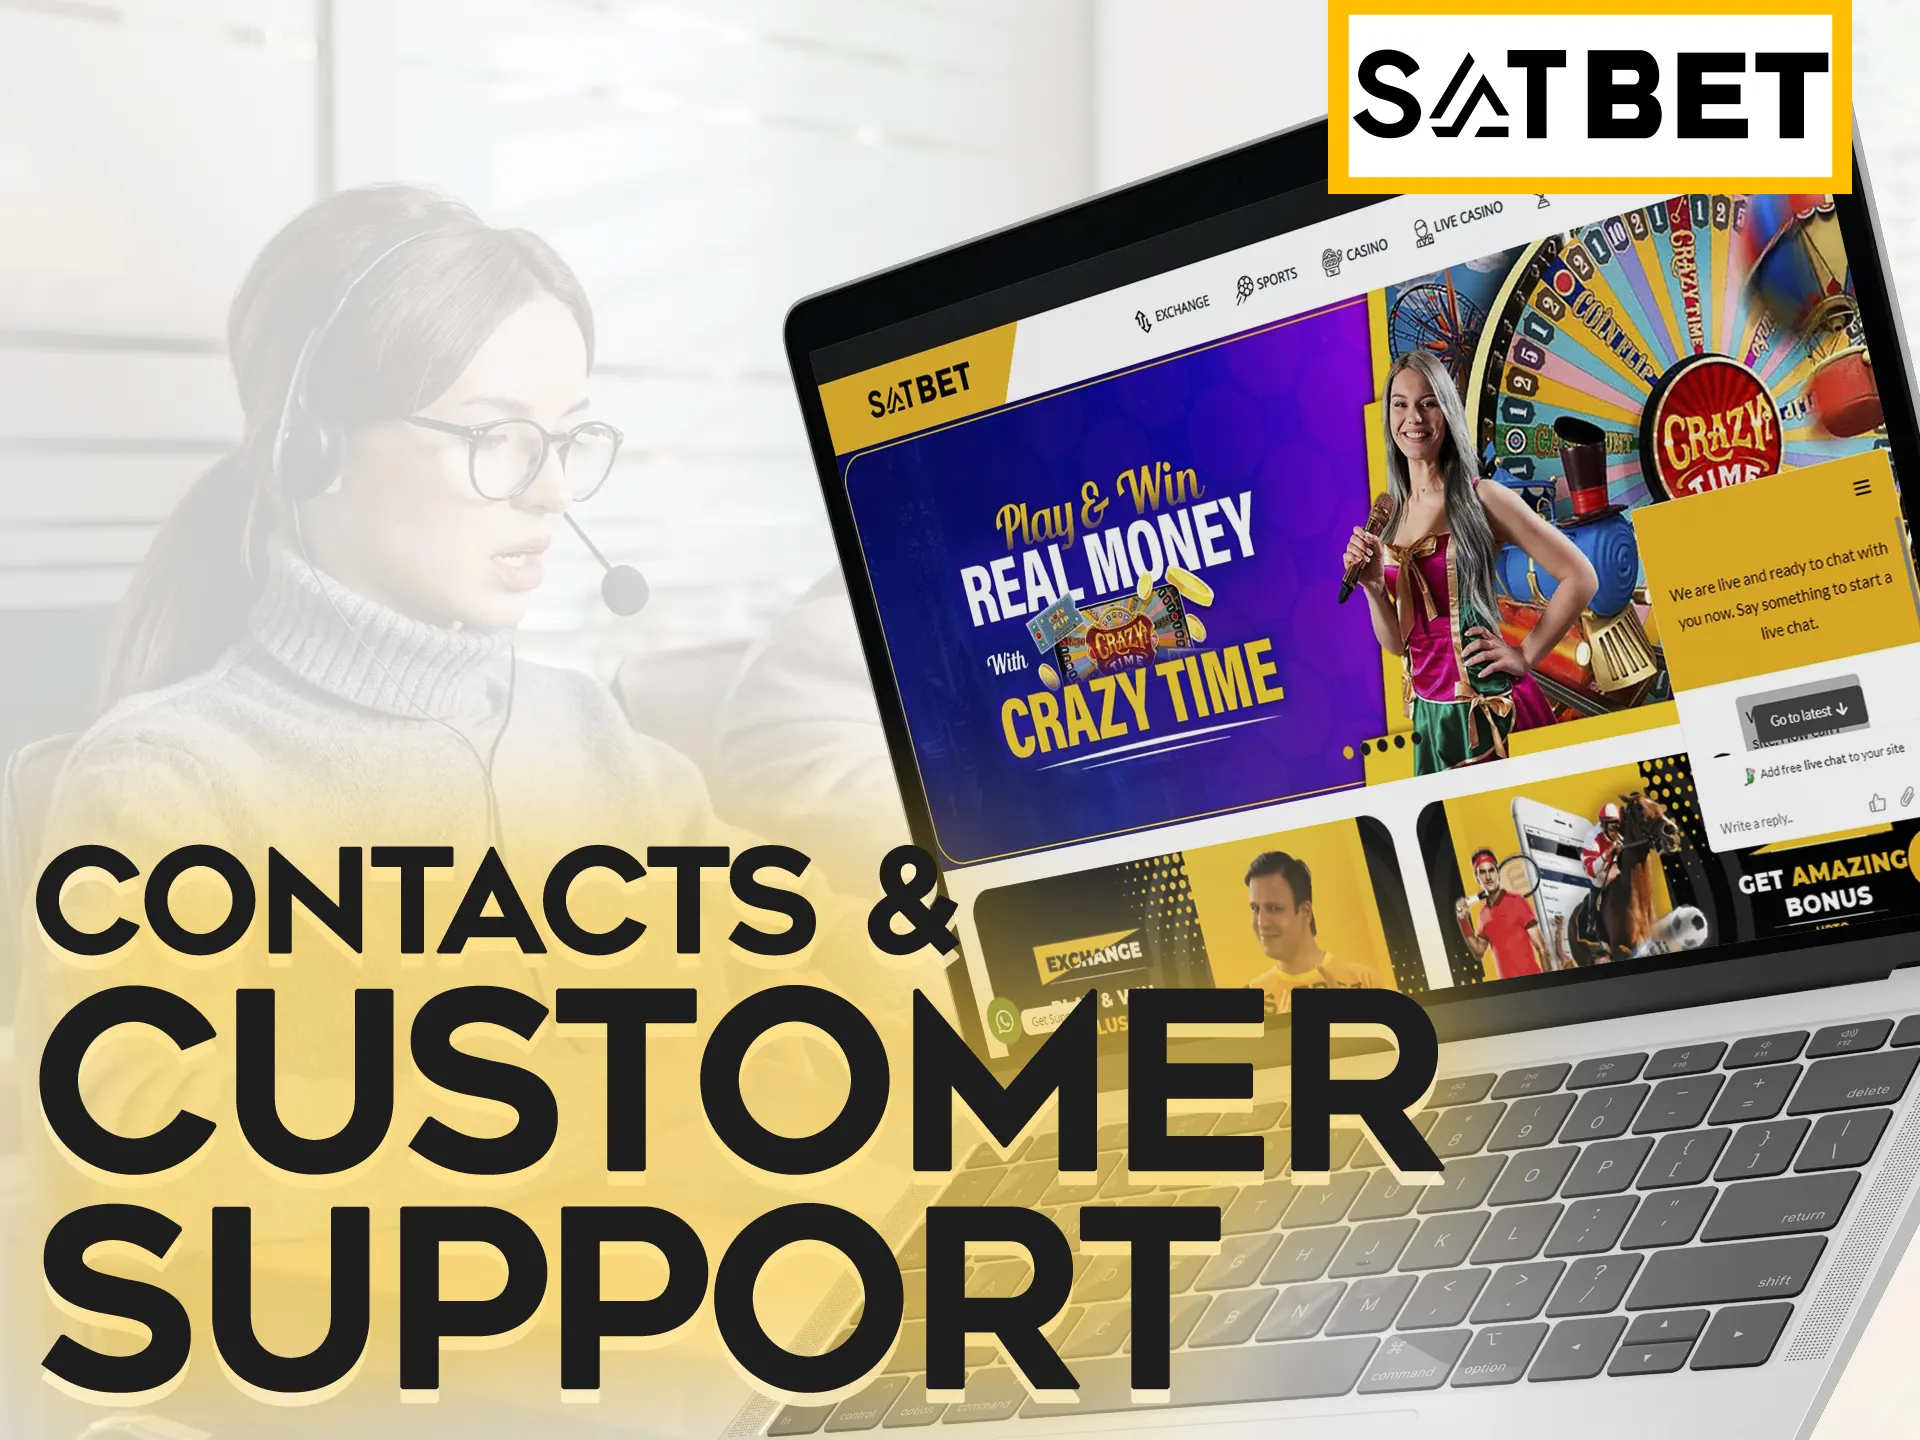 Ask any question to Satbet support.